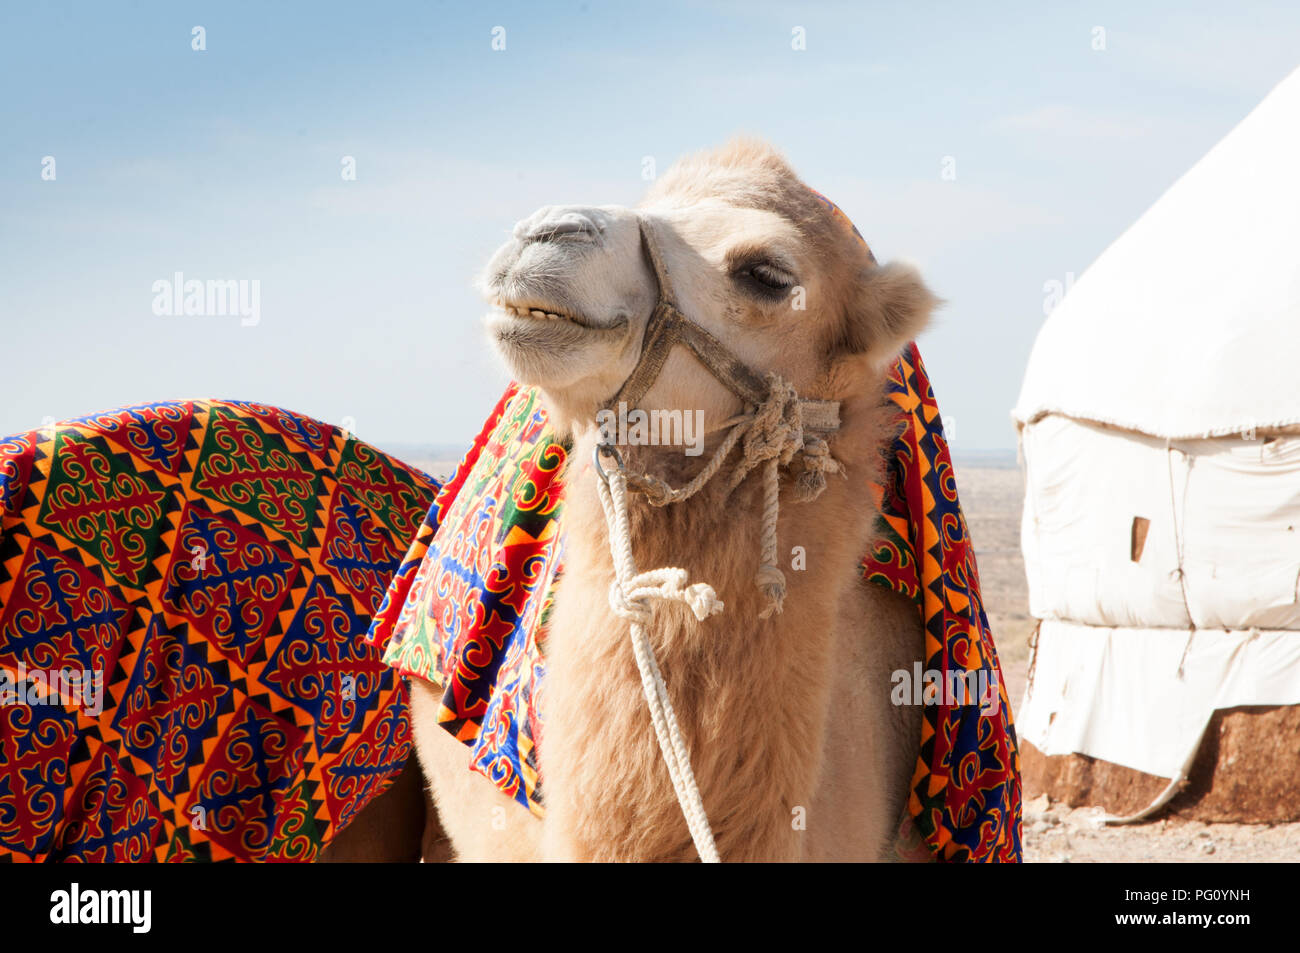 Portrait of funny white fur camel in front of yurt camp in Central Asia, Uzbekistan Stock Photo